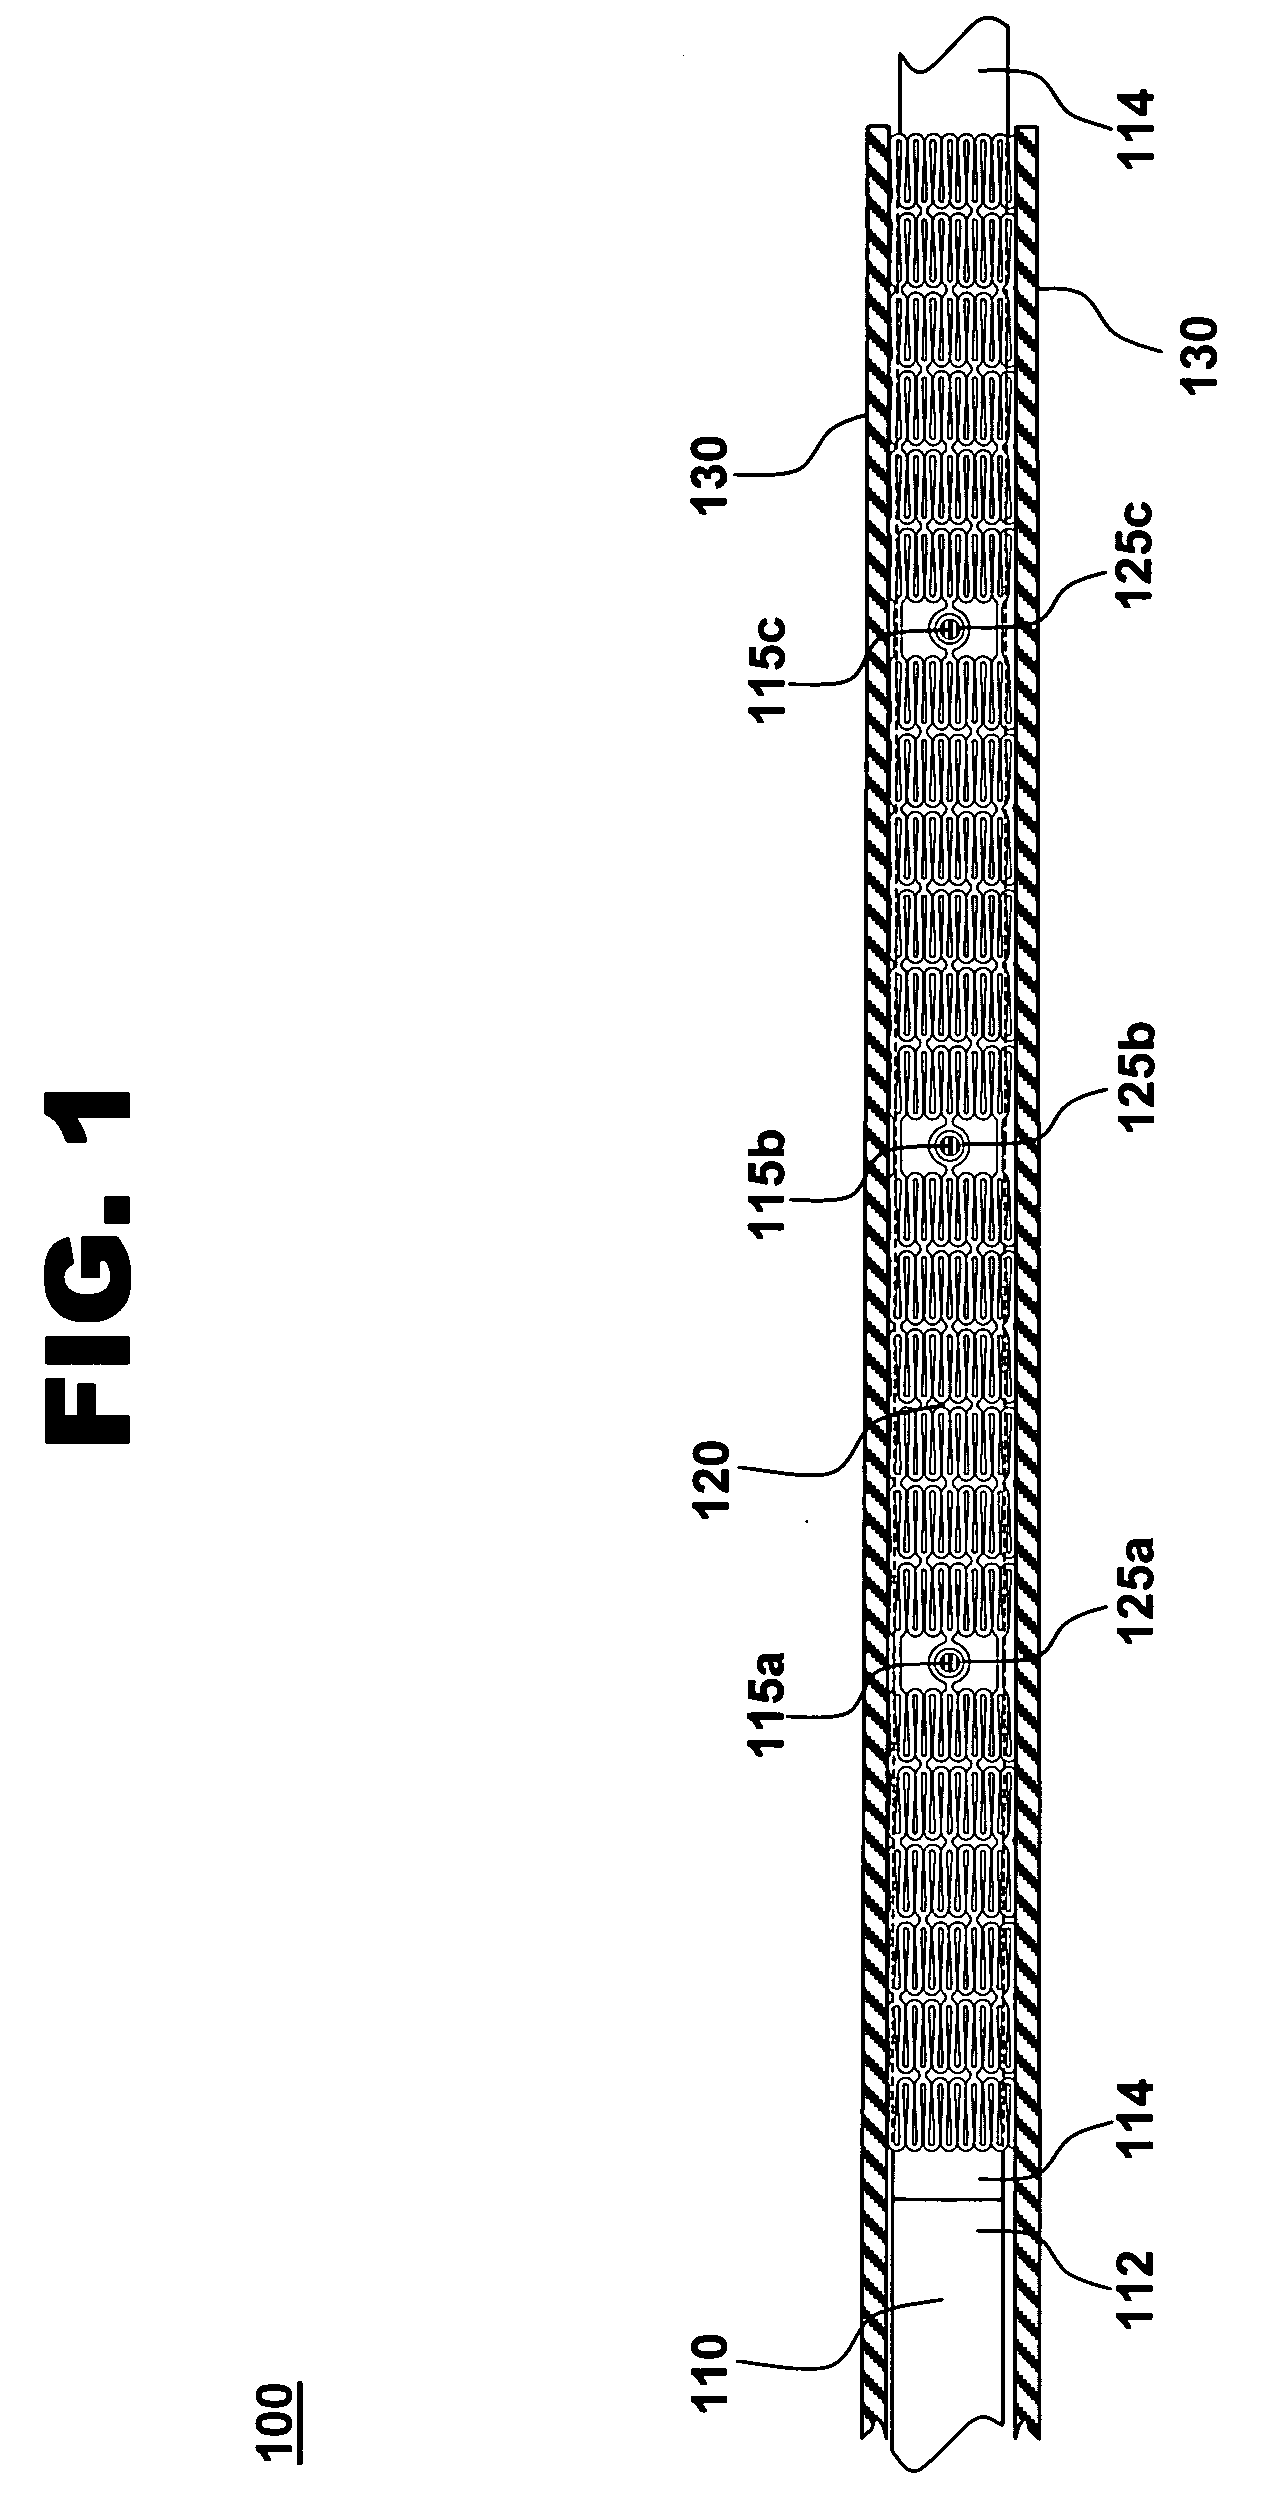 Force distributing system for delivering a self-expanding stent